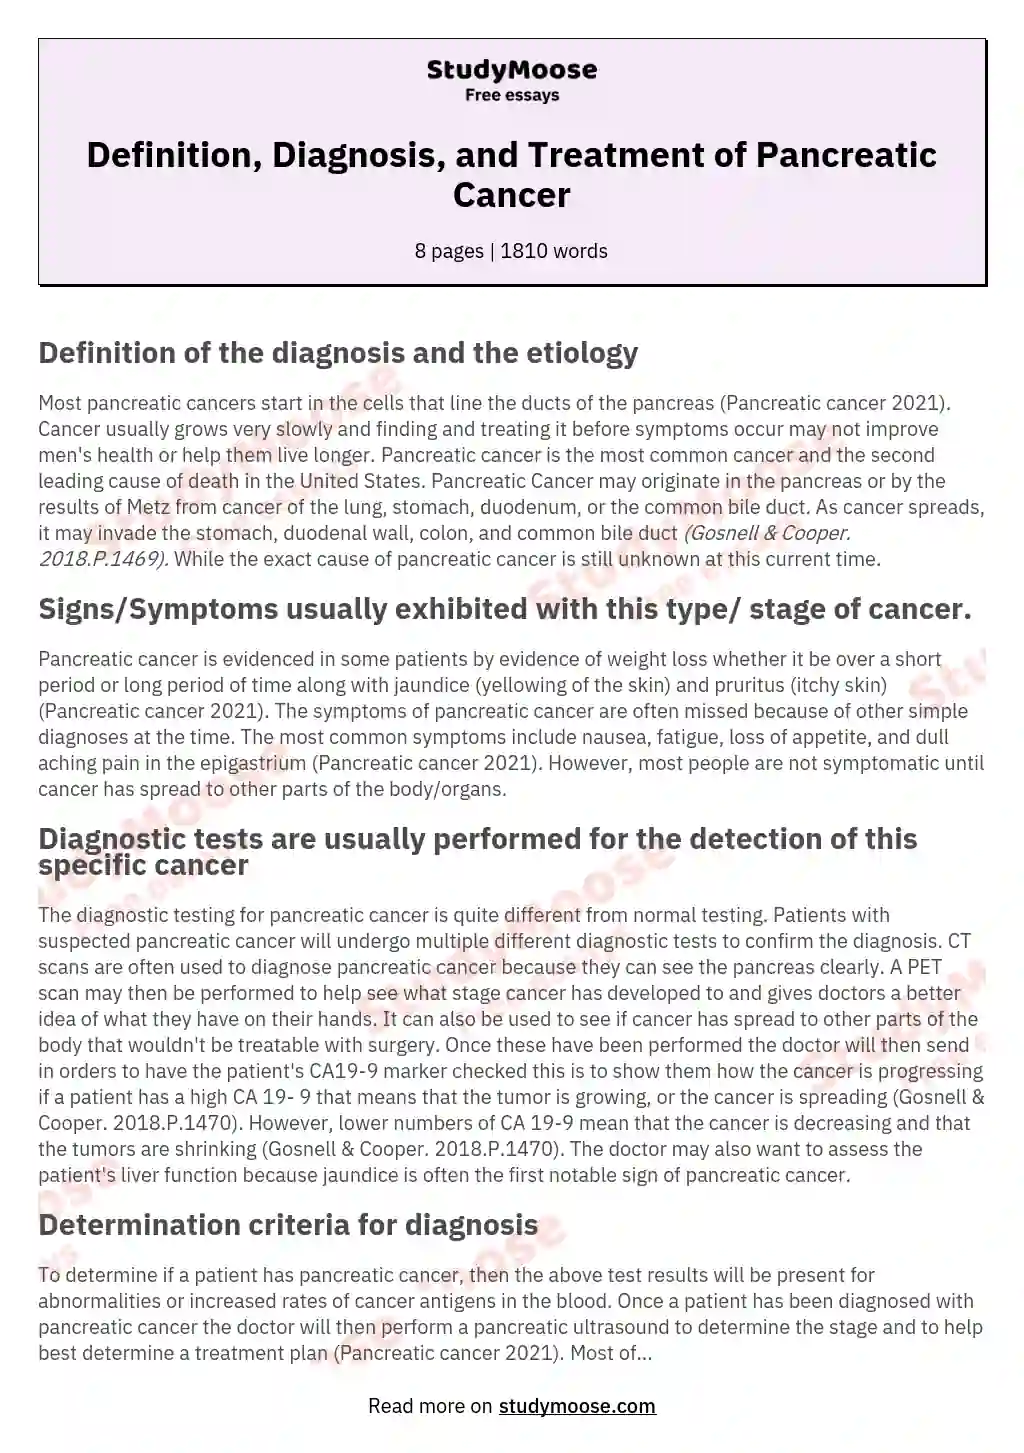 Definition, Diagnosis, and Treatment of Pancreatic Cancer essay